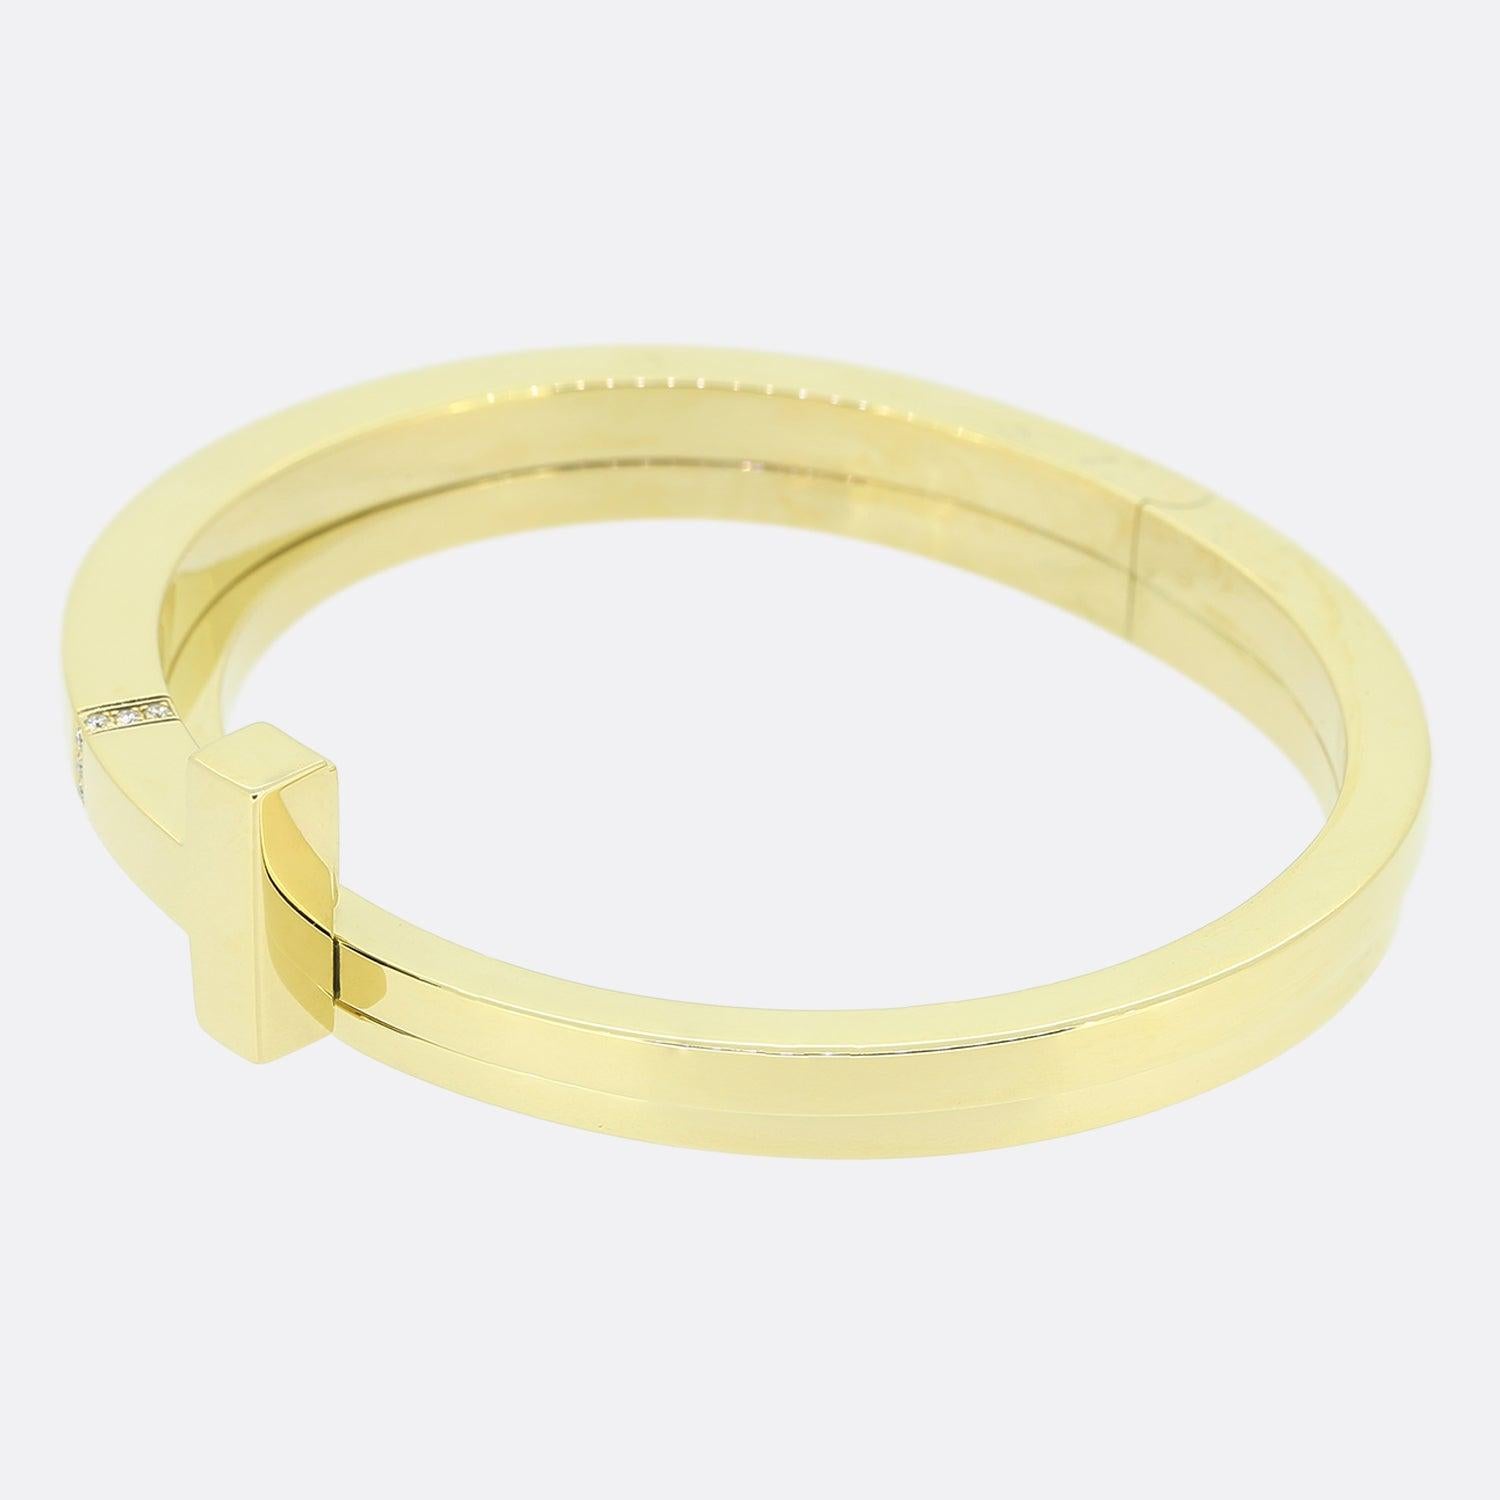 Here we have a wonderful bangle from the world renowned jewellery designer, Tiffany & Co. From the Tiffany T collection, this sleek 18ct yellow gold bracelet features the signature T design enhanced with brilliant diamonds with a 0.05 total carat